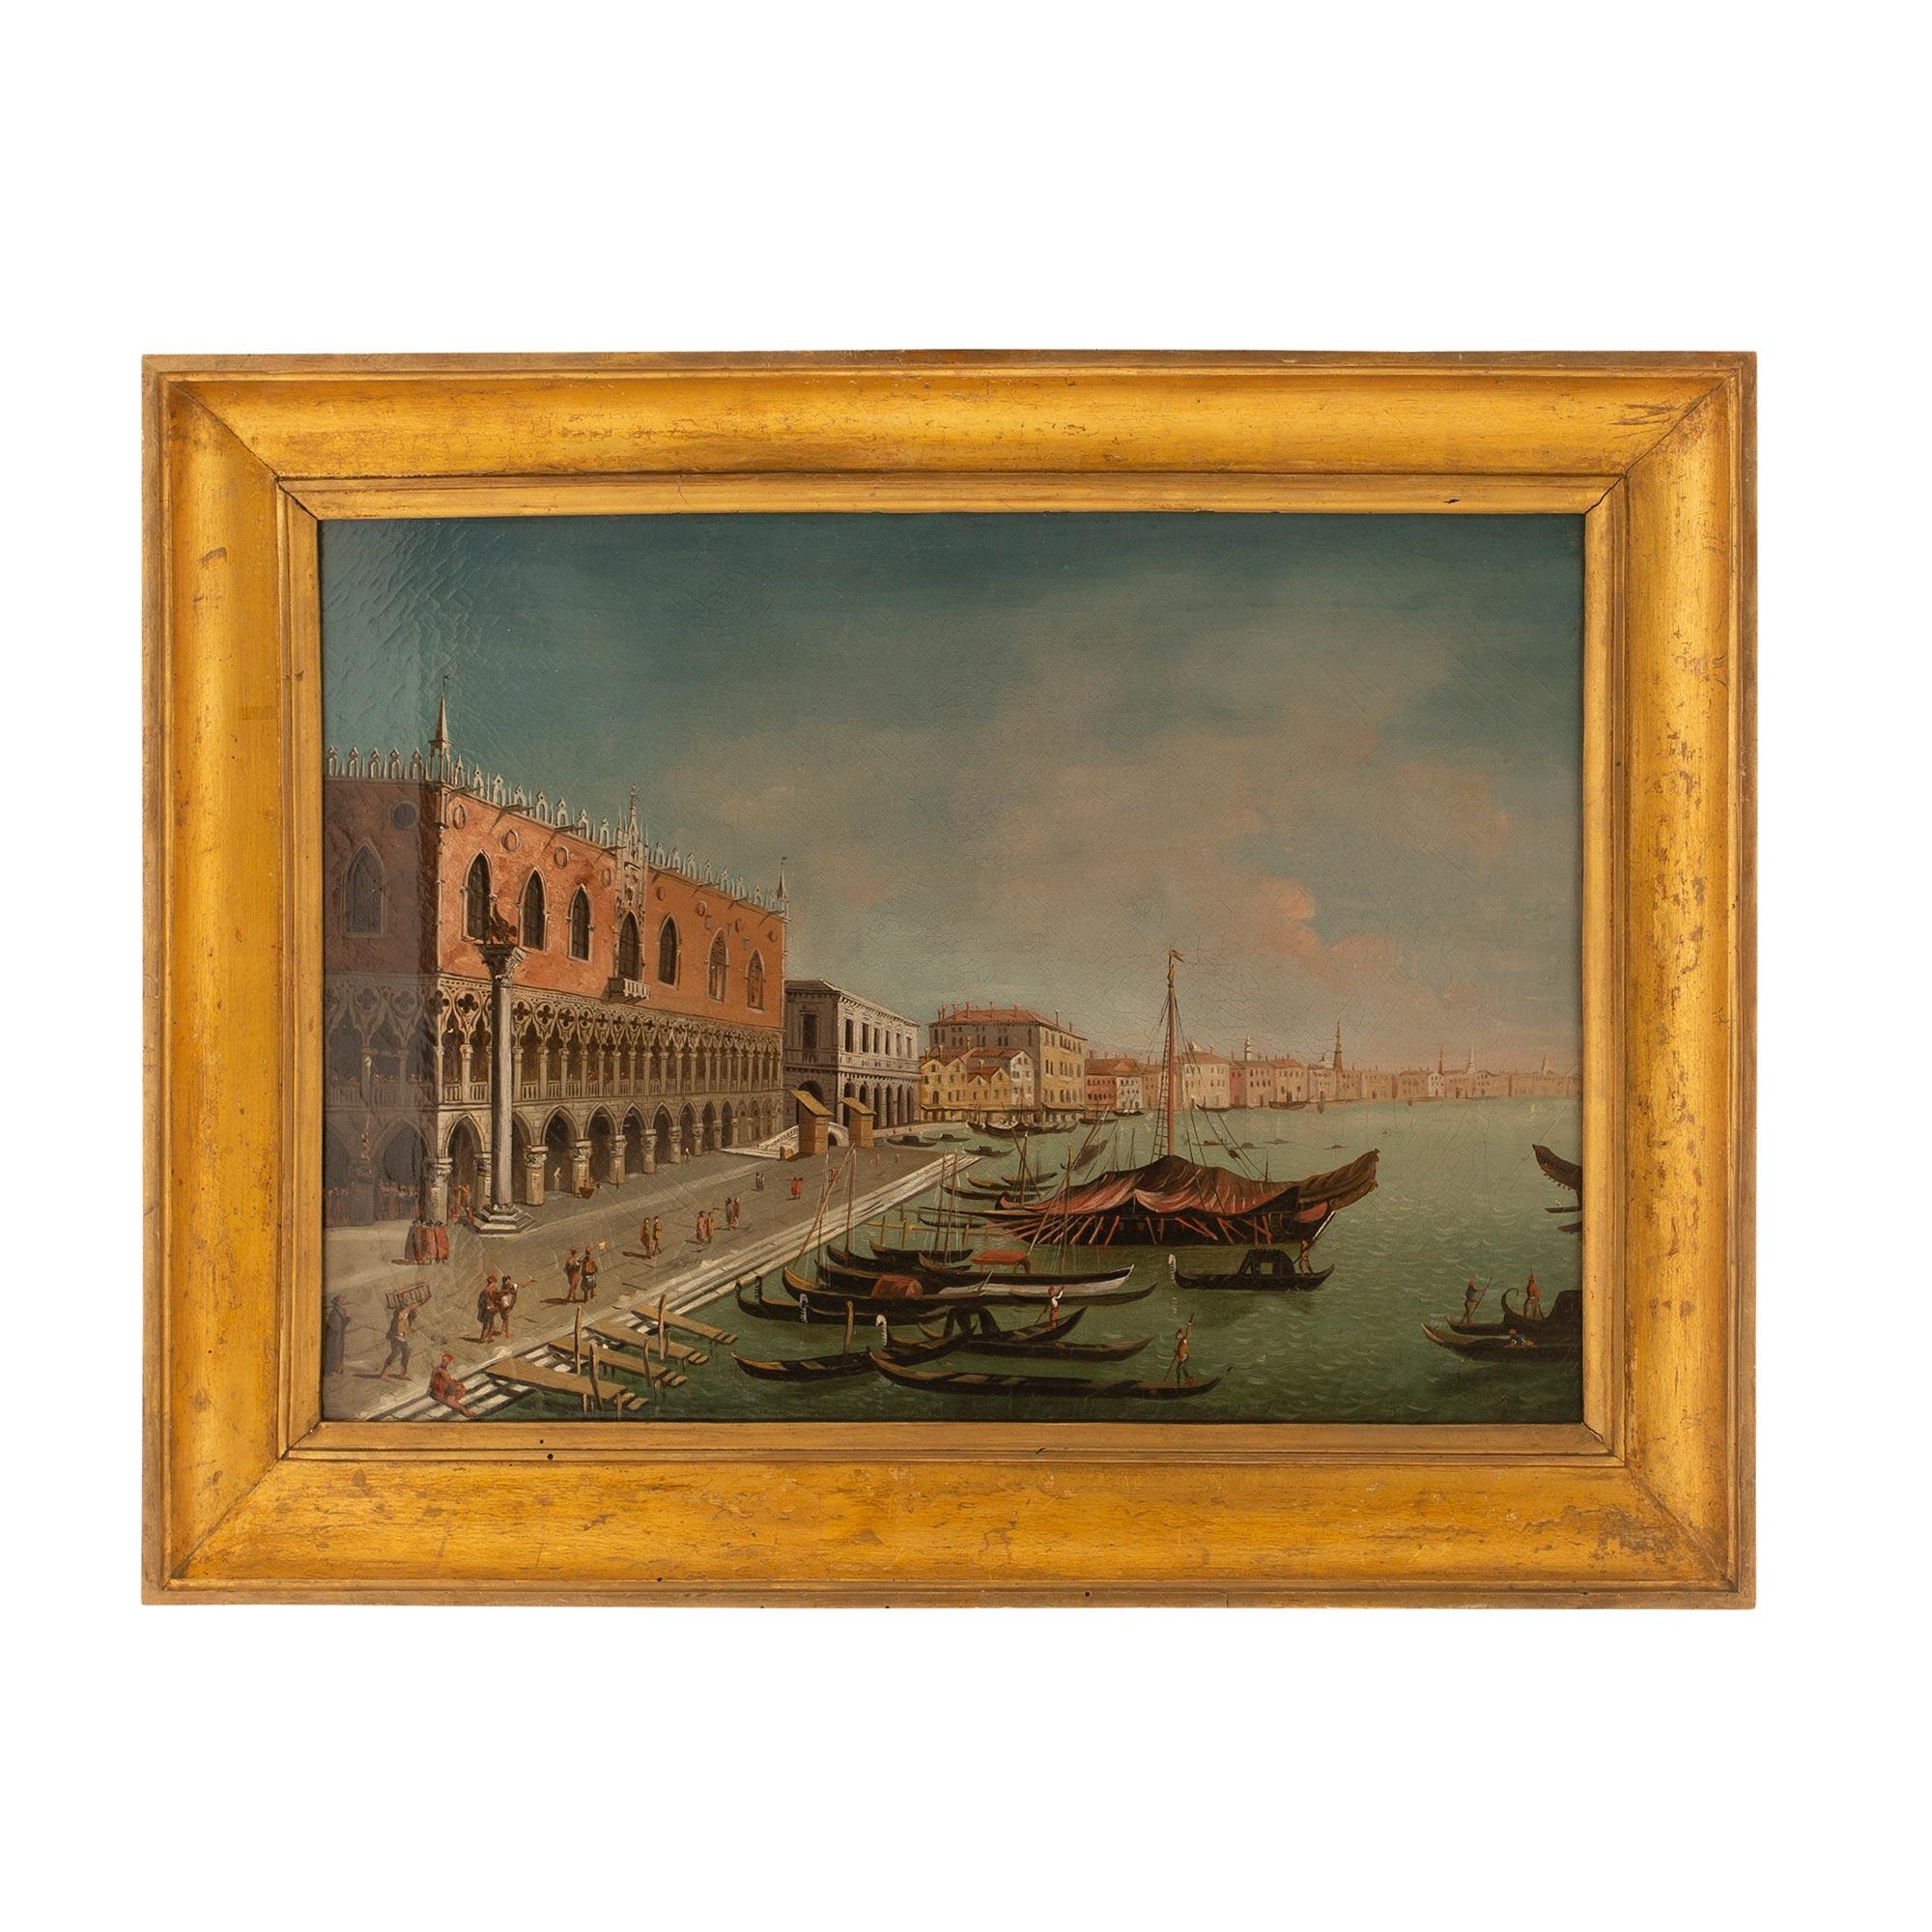 A striking pair of Italian 19th century Venetian oil on canvas paintings. Each painting is set within their original giltwood frame. The charming scenes depict Venice and show the canals and Piazza San Marco. All original gilt throughout.

  